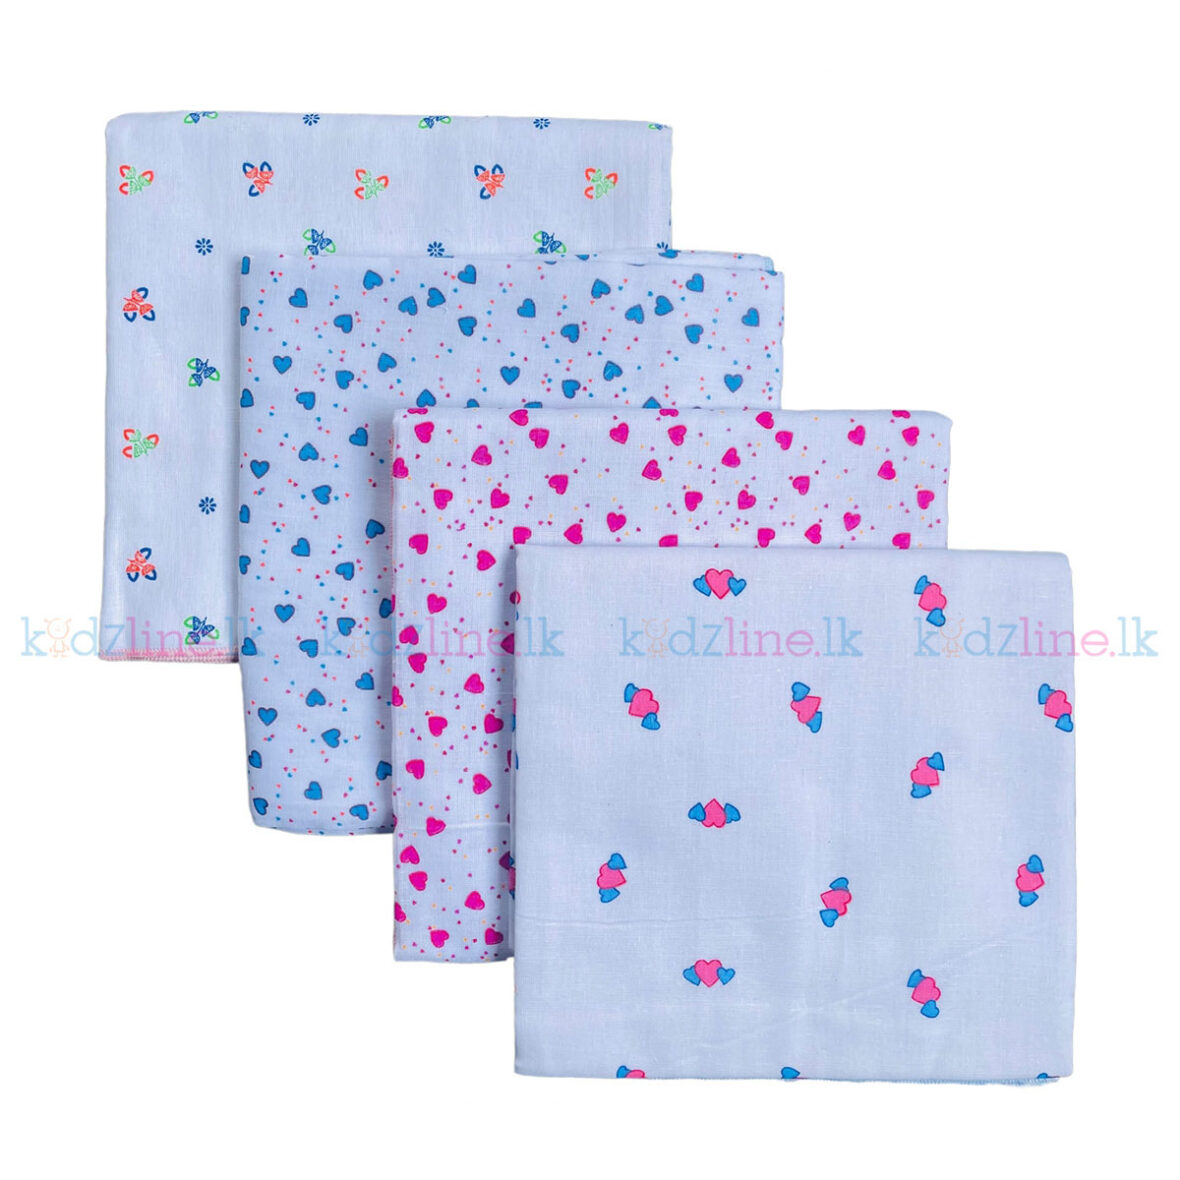 36×36 mull fabric Wrapping Cloth  (Double)